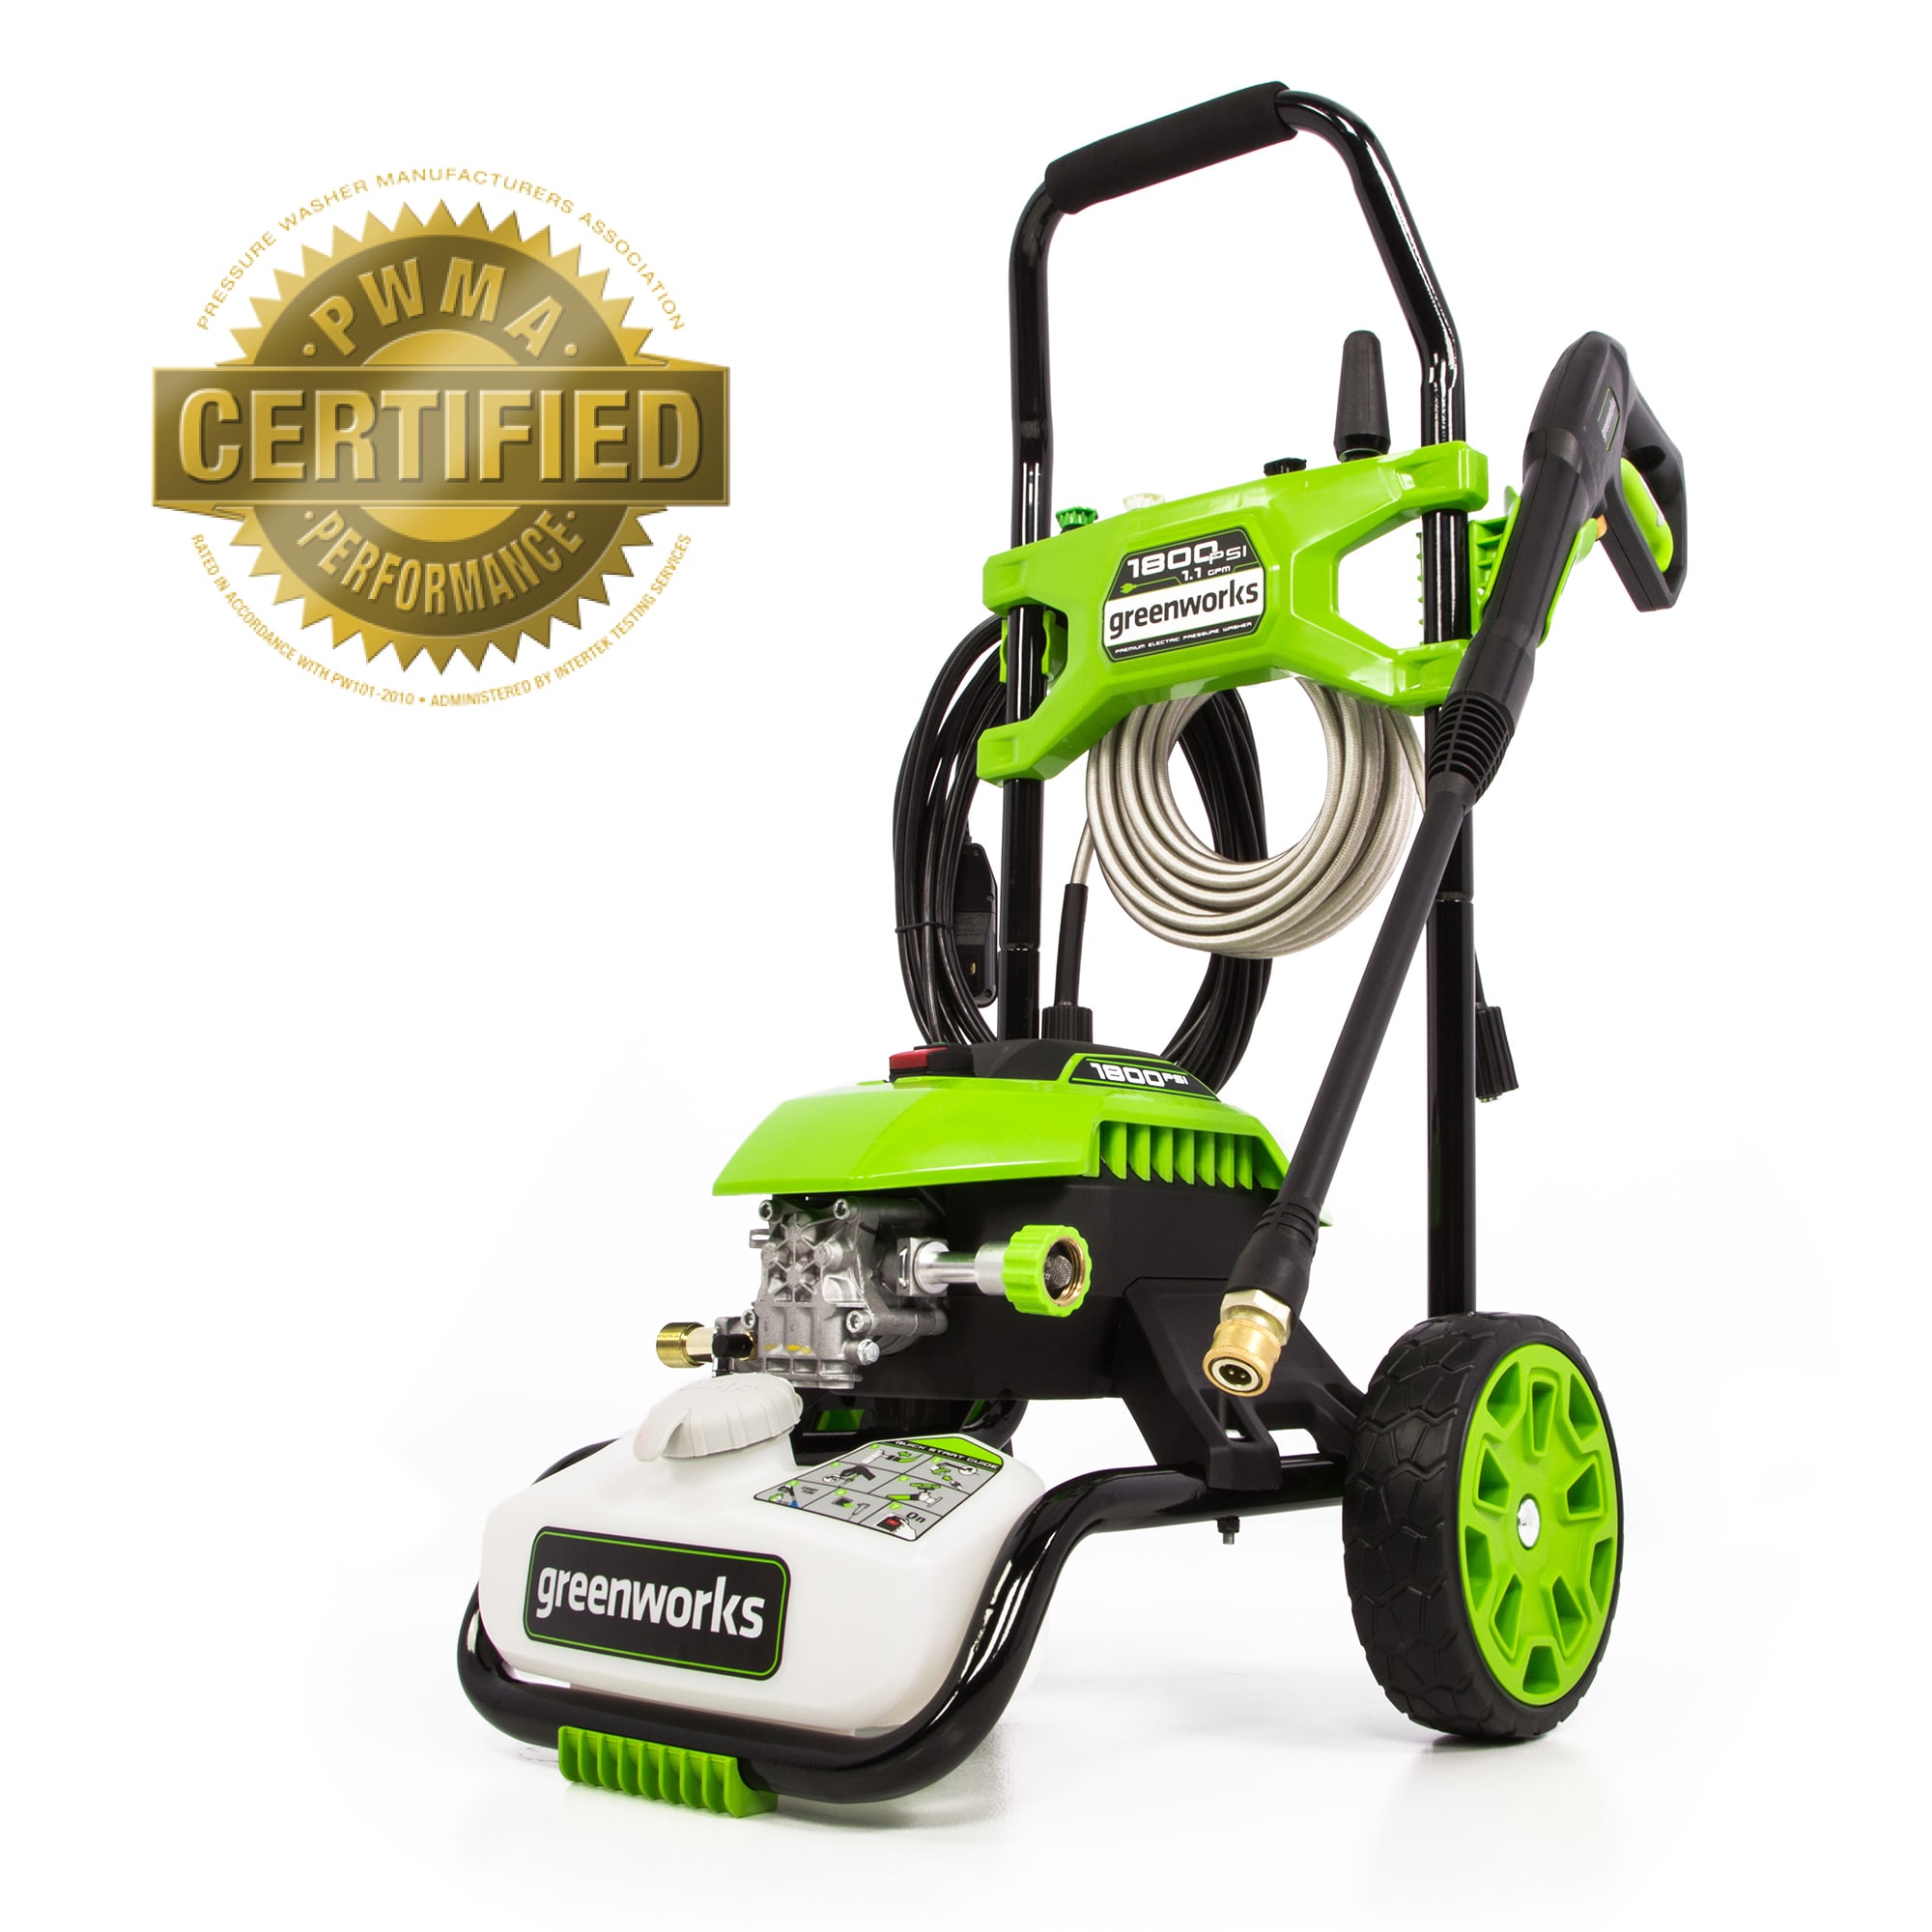 Greenworks 1800 PSI 1.1-Gallon-GPM Cold Water Electric Pressure Washer